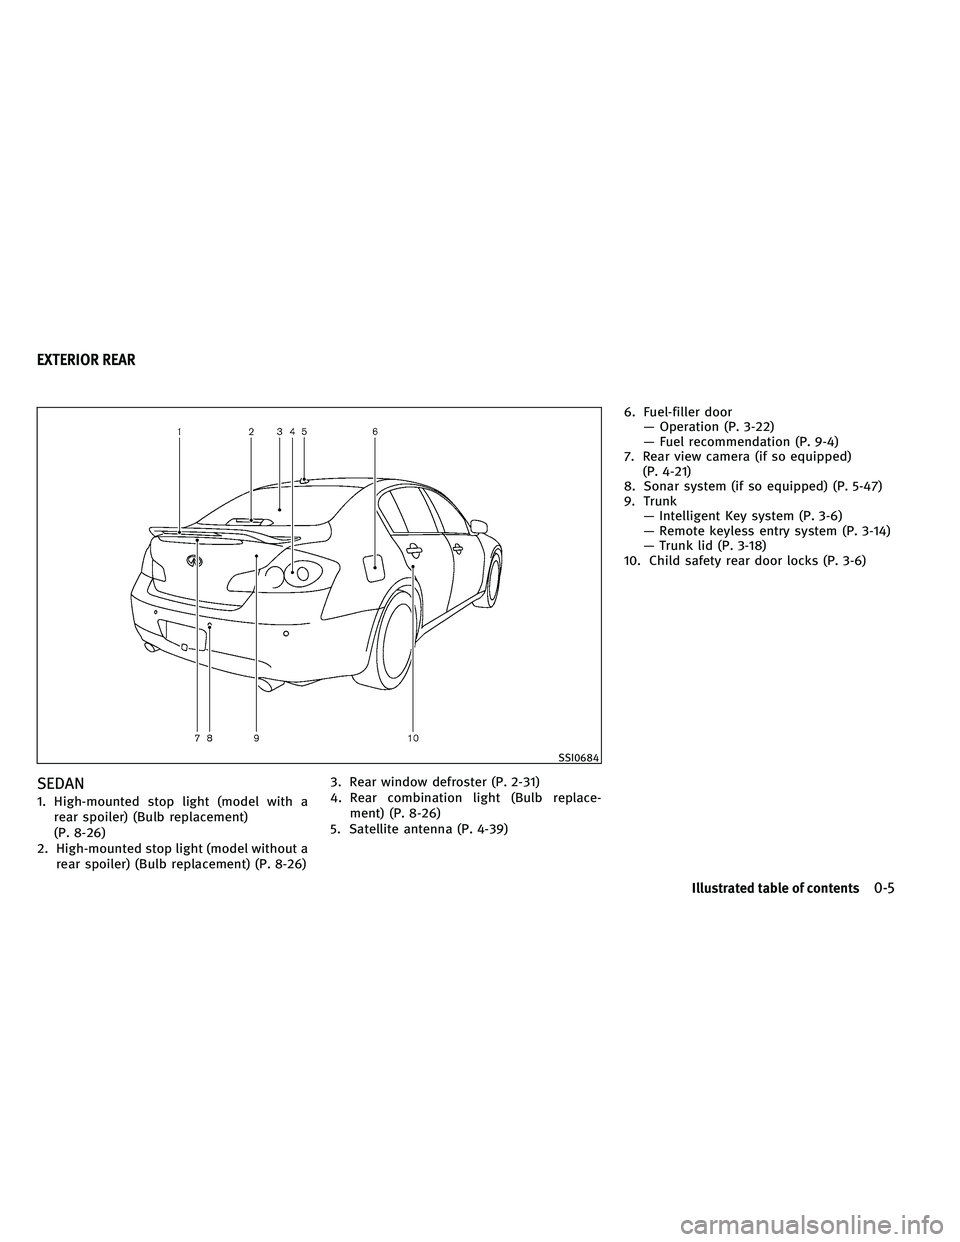 INFINITI G-COUPE 2011  Owners Manual SEDAN
1. High-mounted stop light (model with arear spoiler) (Bulb replacement)
(P. 8-26)
2. High-mounted stop light (model without a rear spoiler) (Bulb replacement) (P. 8-26) 3. Rear window defroster